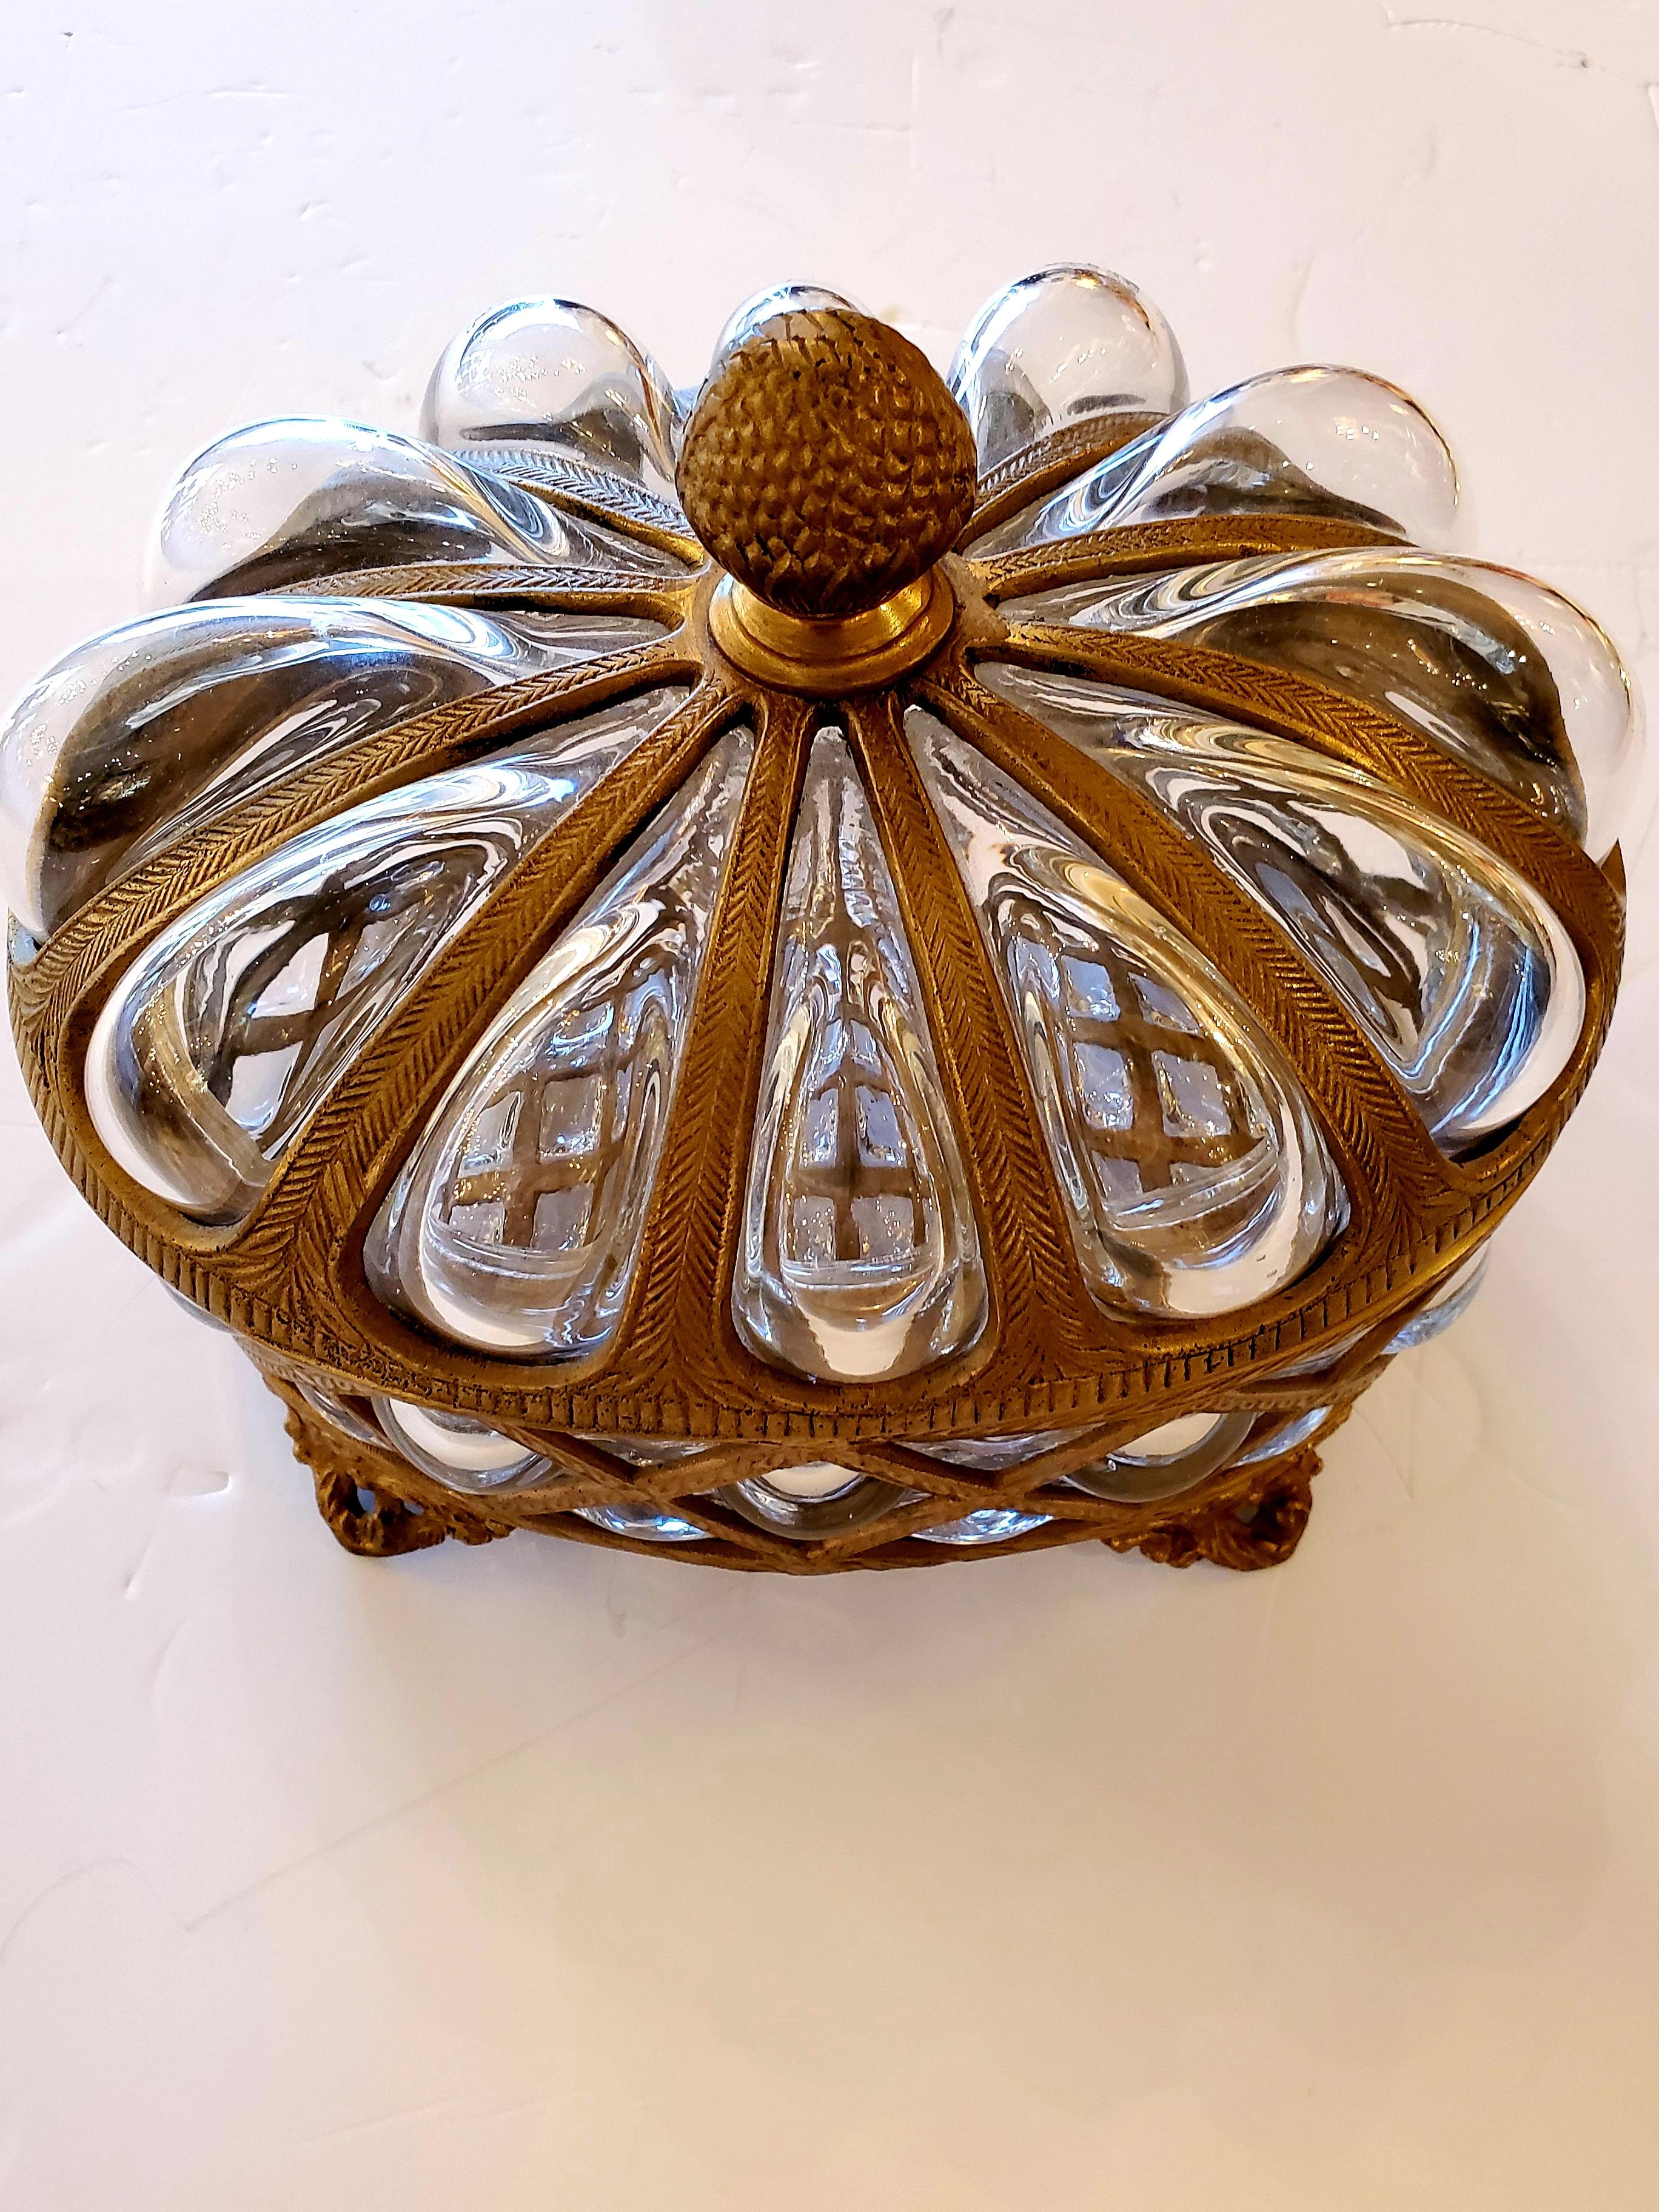 Prettiest box ever having murano glass and brass with bubbles of delicious glass oozing up from the lid and detailed brass structure including acorn finial on top and lovely feet.